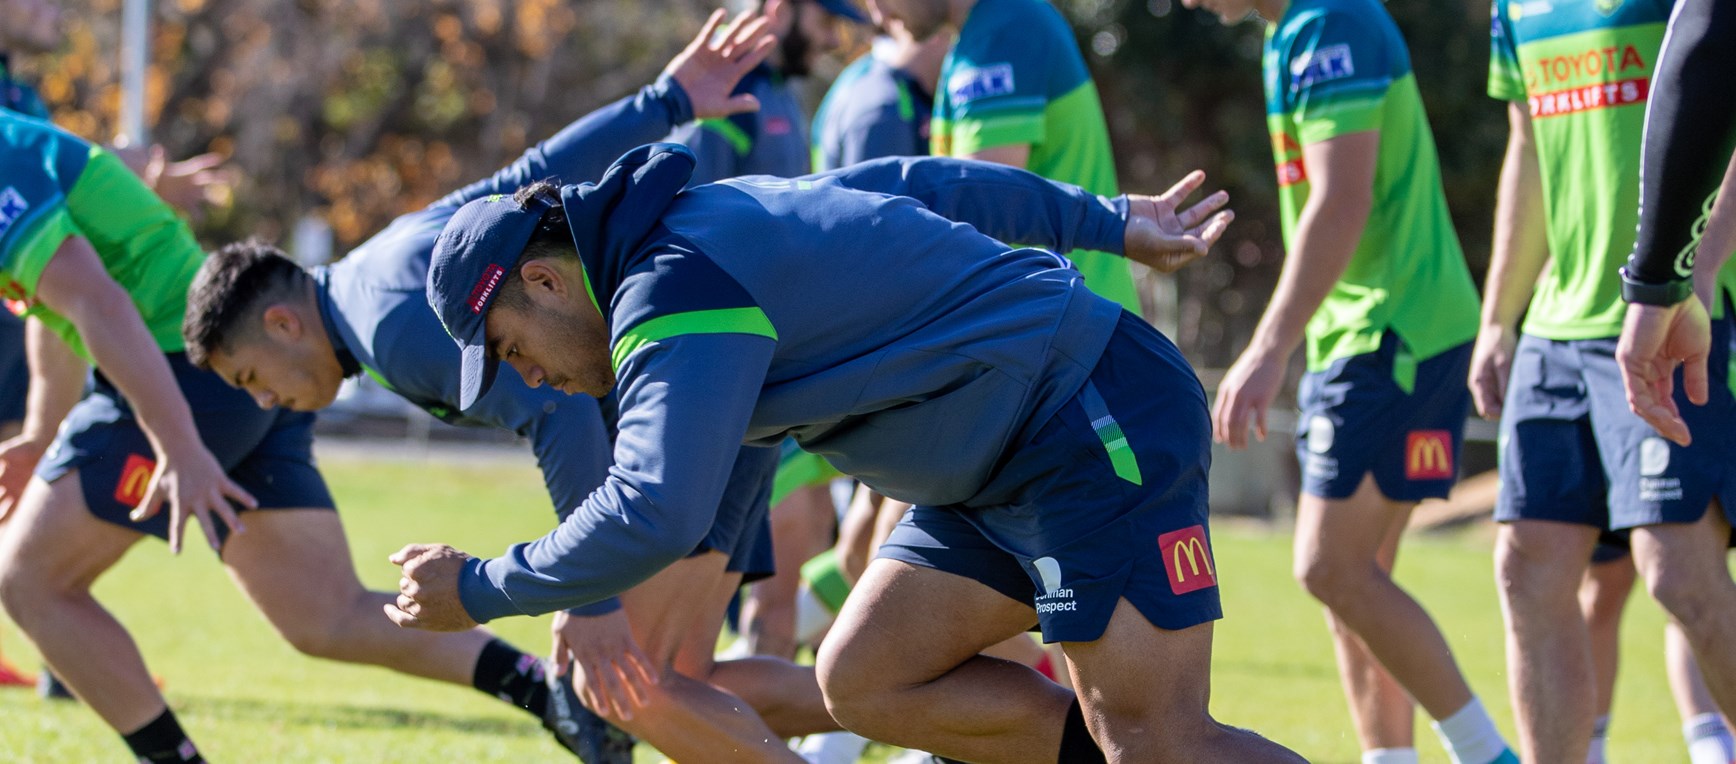 Gallery: Gearing up for Rabbitohs